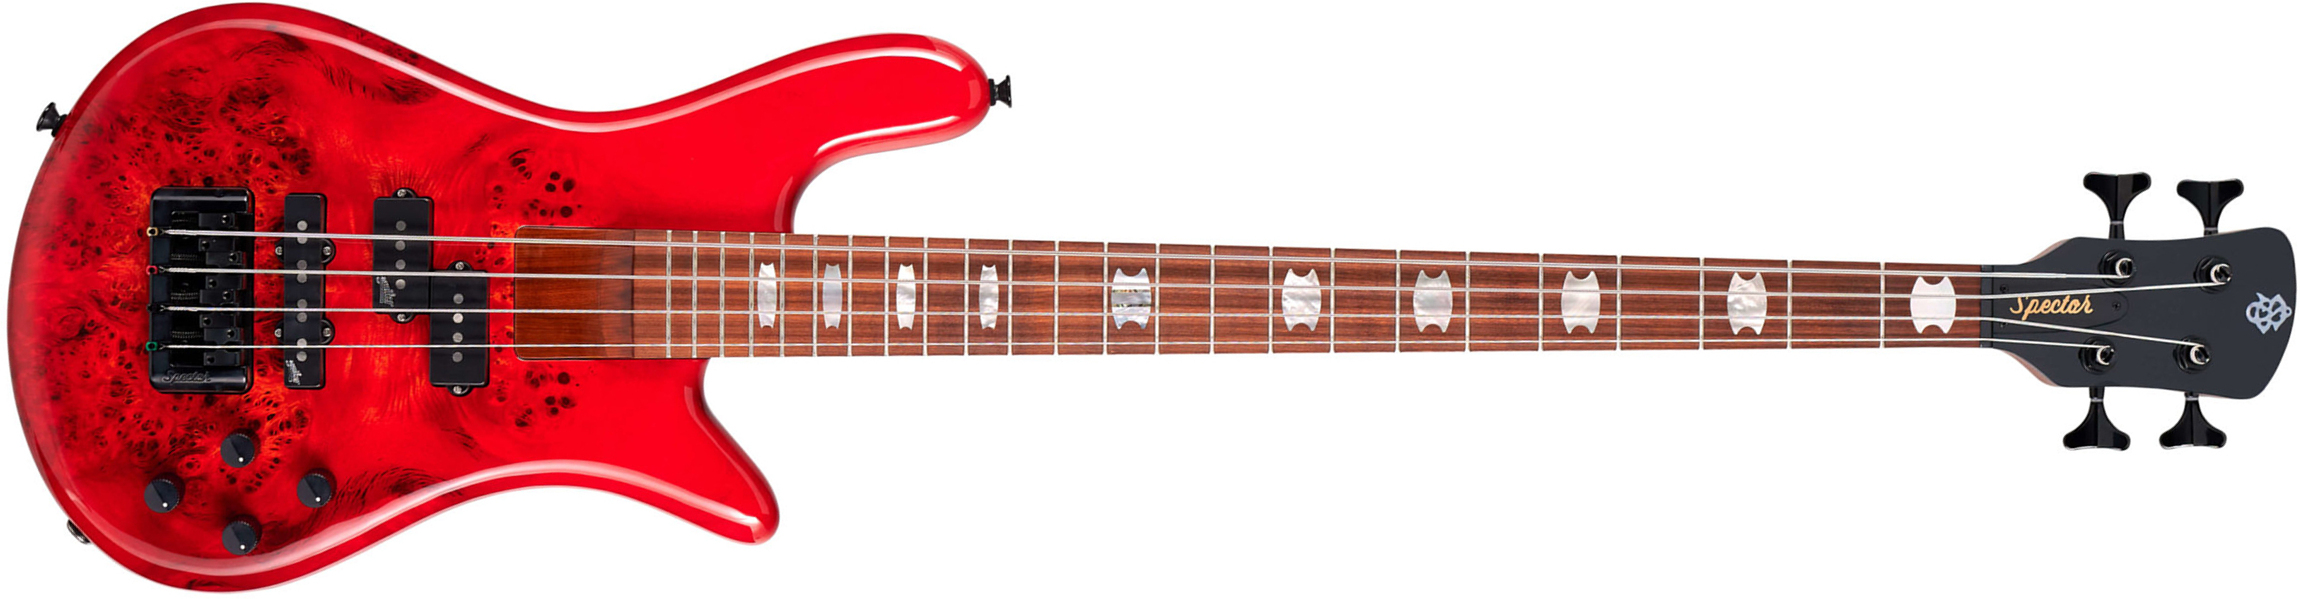 Spector Ns Eurobolt 4c Active Aguilar Mn - Inferno Red - Solidbody E-bass - Main picture